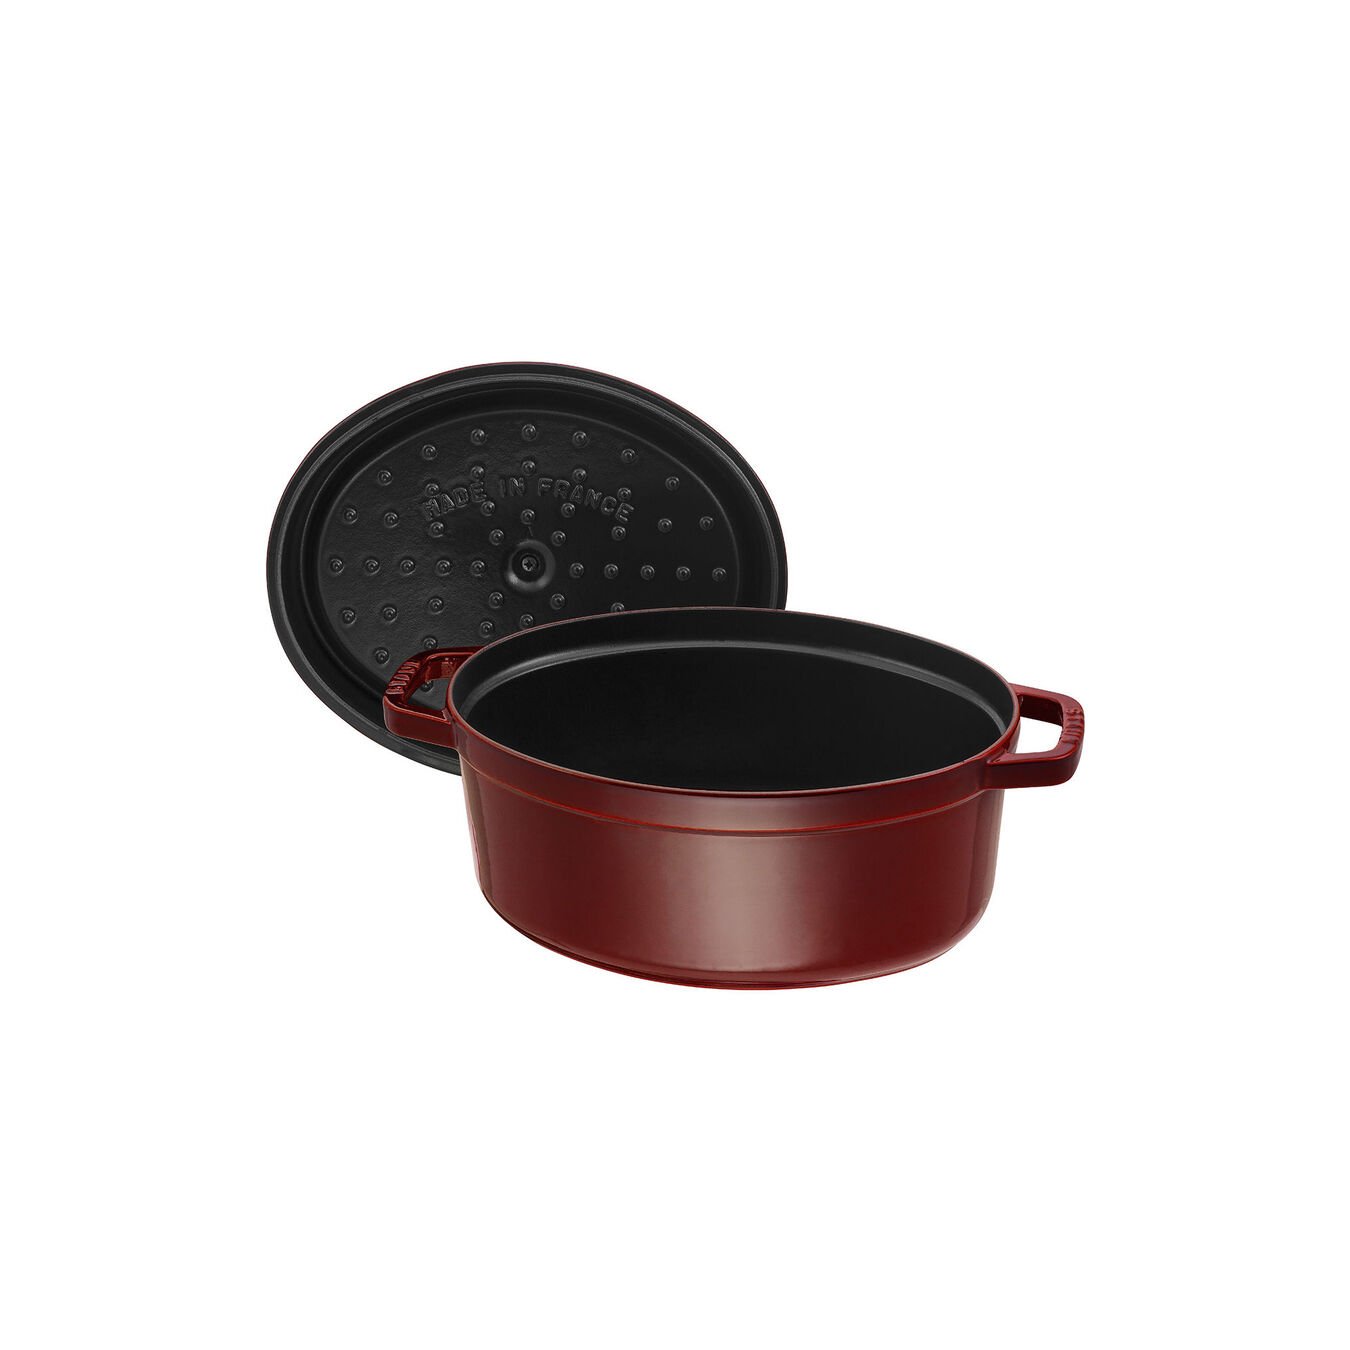 Cocotte 33 cm, oval, Grenadine-Rot, Gusseisen,,large 3